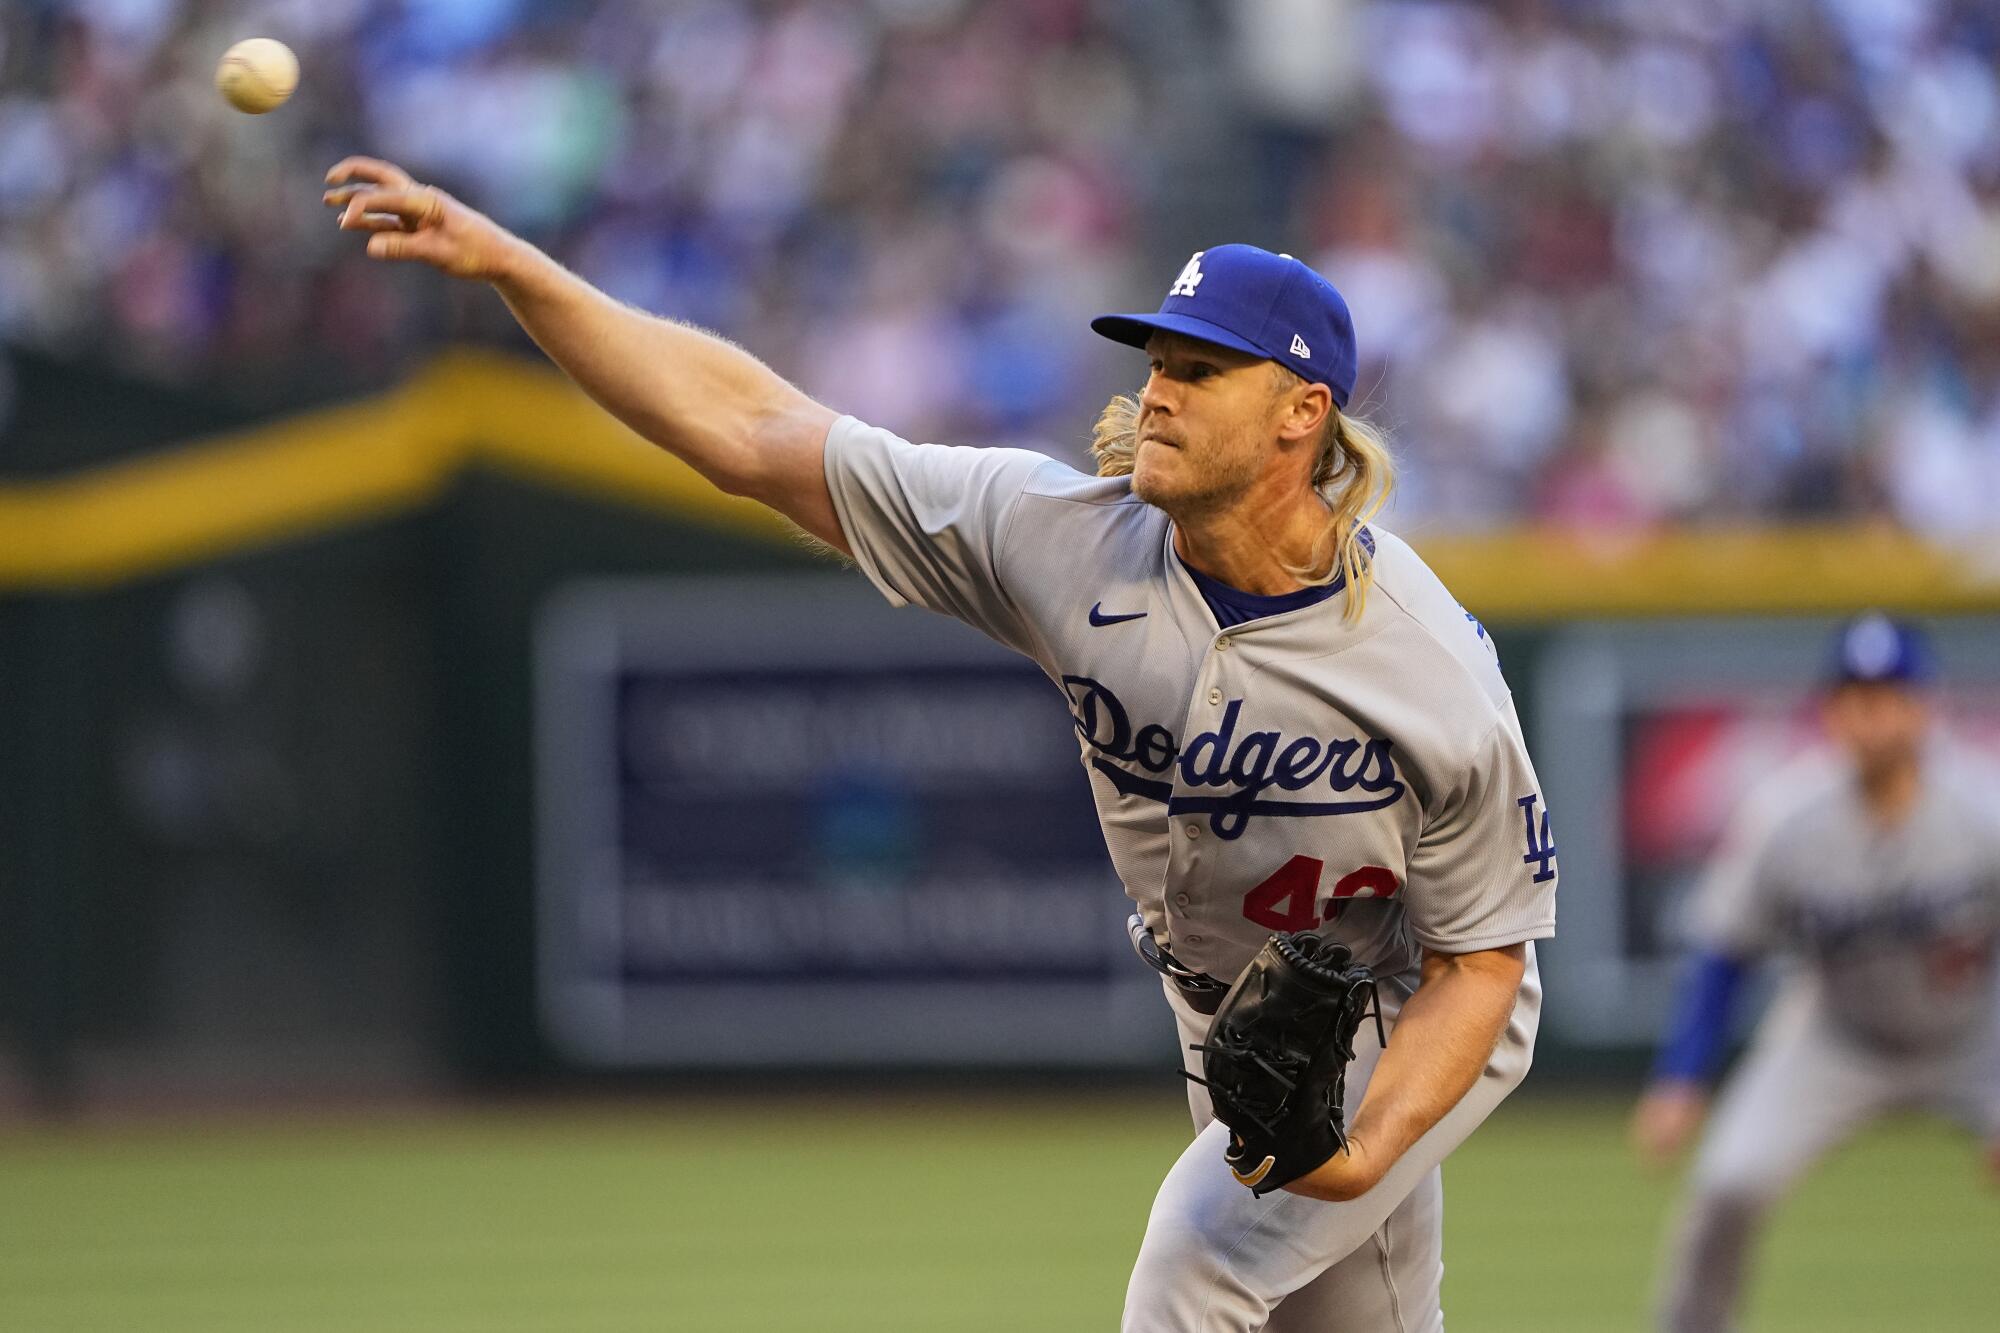 Noah Syndergaard struggles and Dodgers give up 17 hits in loss